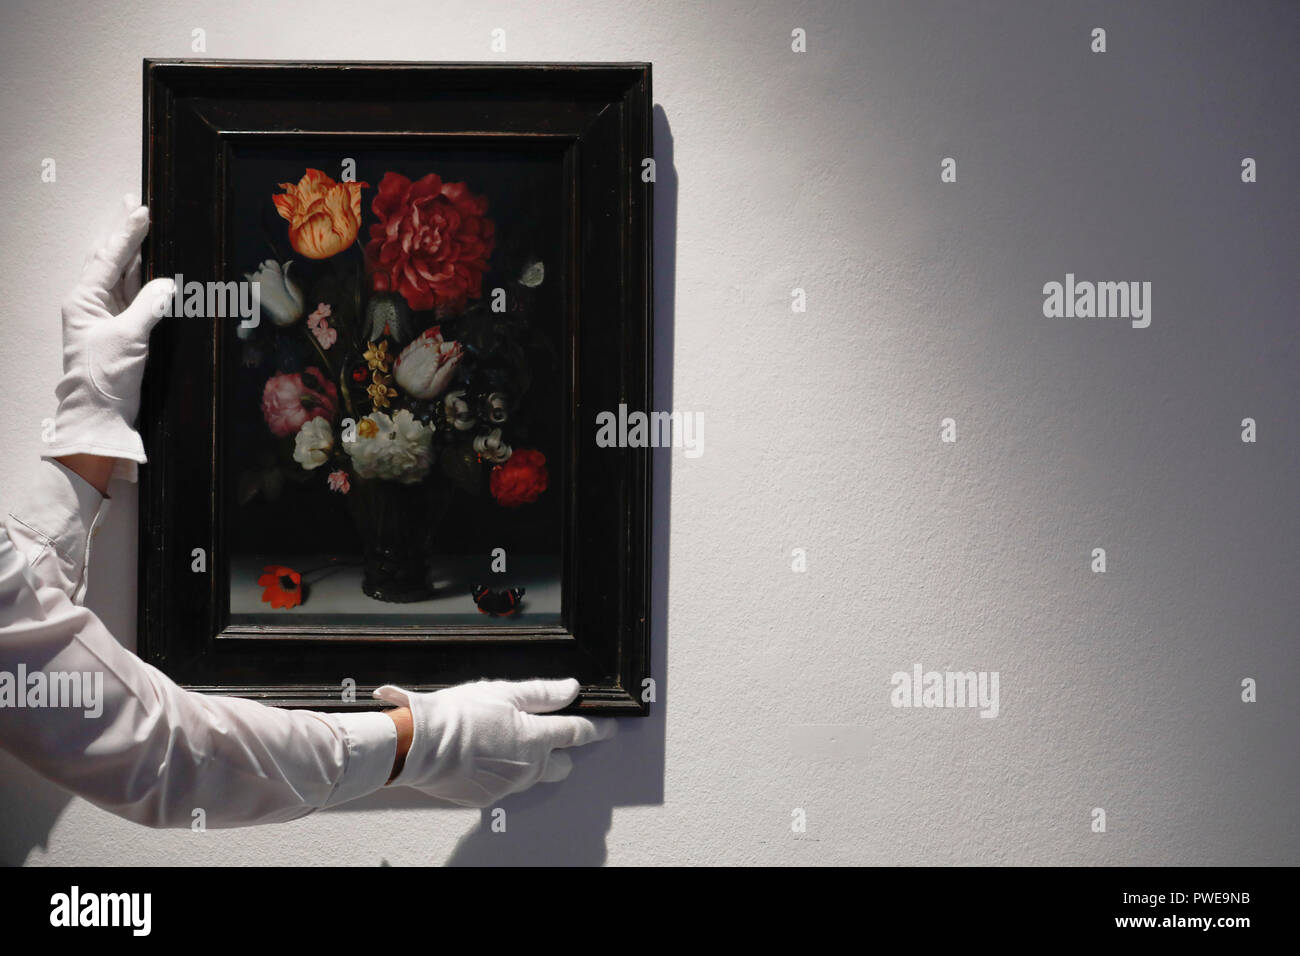 London, UK, 16th Oct 2018. Christie's art handler adjusts Dutch master Ambrosius Bosschaert, the Elder 's artwork 'Flowers in a berkemeier glass on a stone ledge' at Christie's AuctionHouse in London, UK, Tuesday October 16, 2017. The piece is expected to achieve up to £1.2million when is comes to auction as part of the Albada Jelgersma Collection sale during Christie's Classic Week in December. Photograph : Credit: Luke MacGregor/Alamy Live News Stock Photo